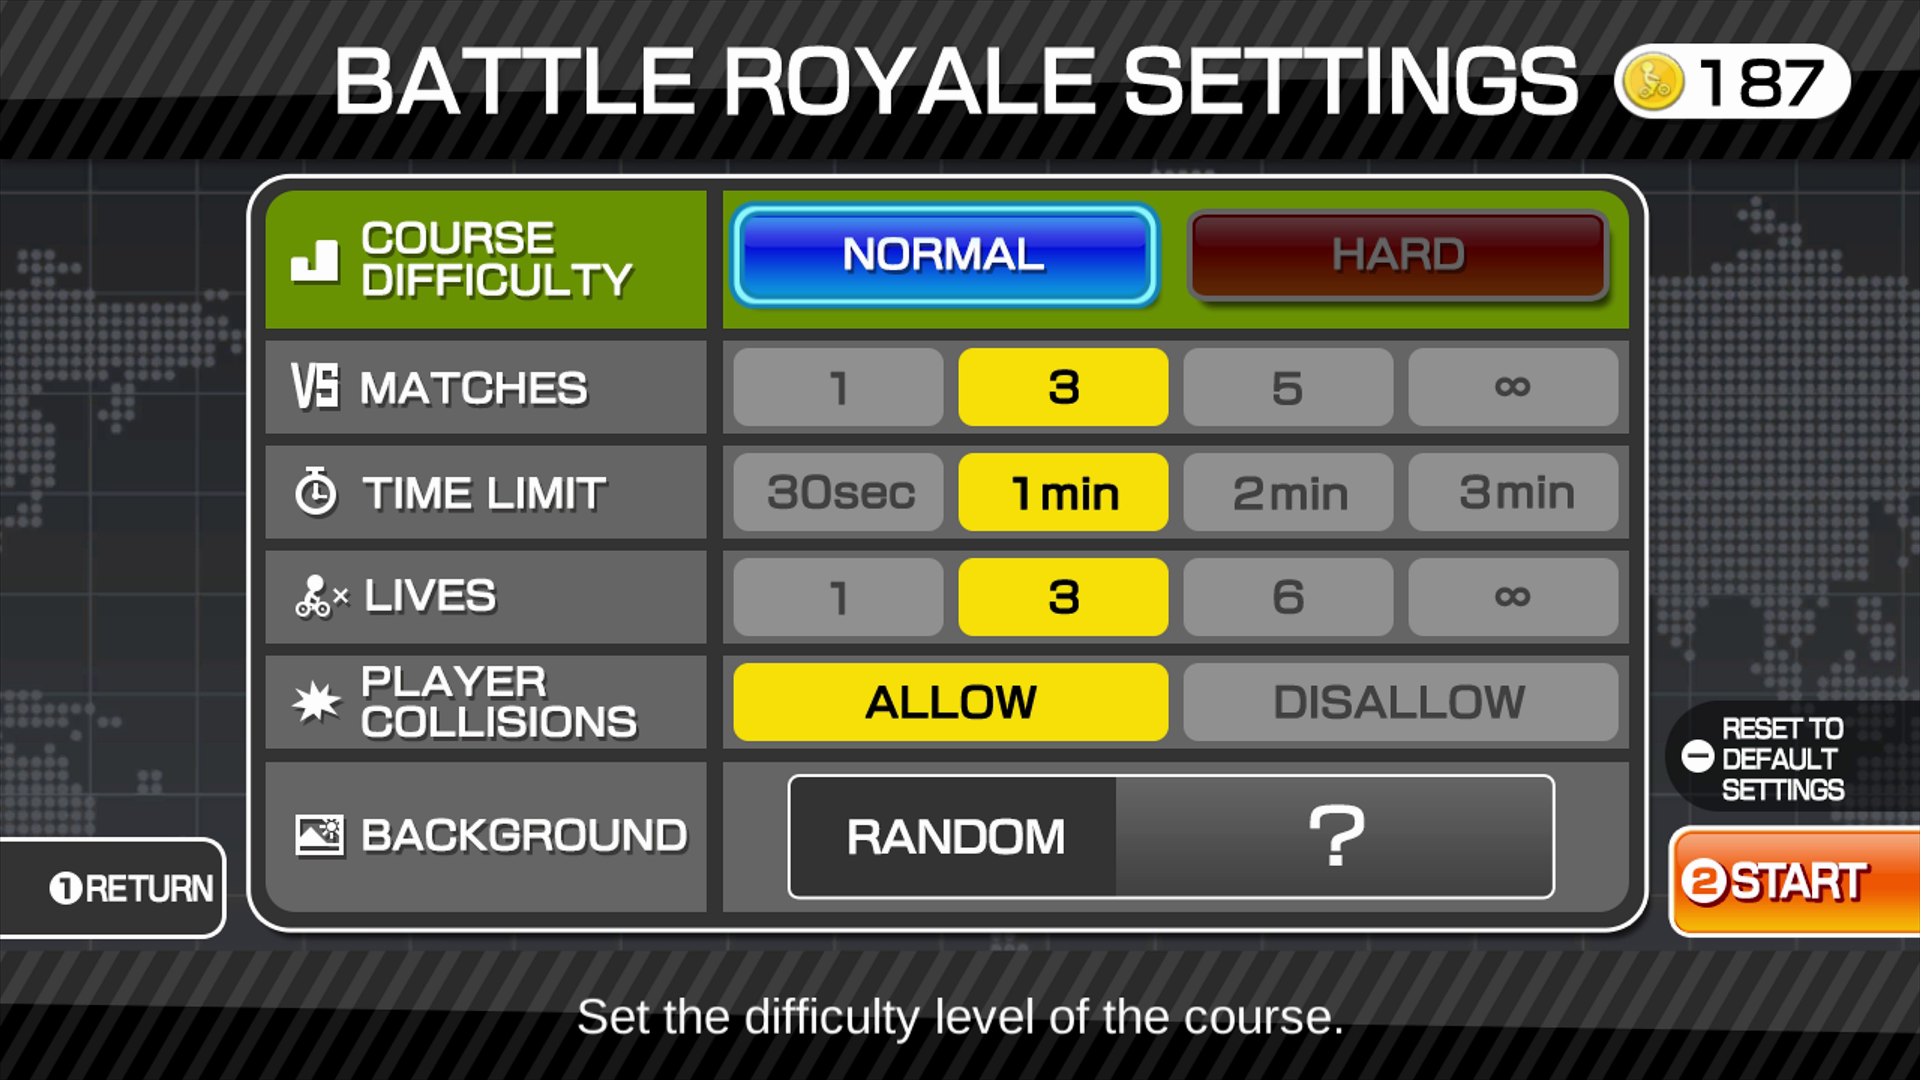 The Battle Royale options are quite extensive. You can change the number of matches, the time limit, the number of lives available and even turn player collisions on and off.